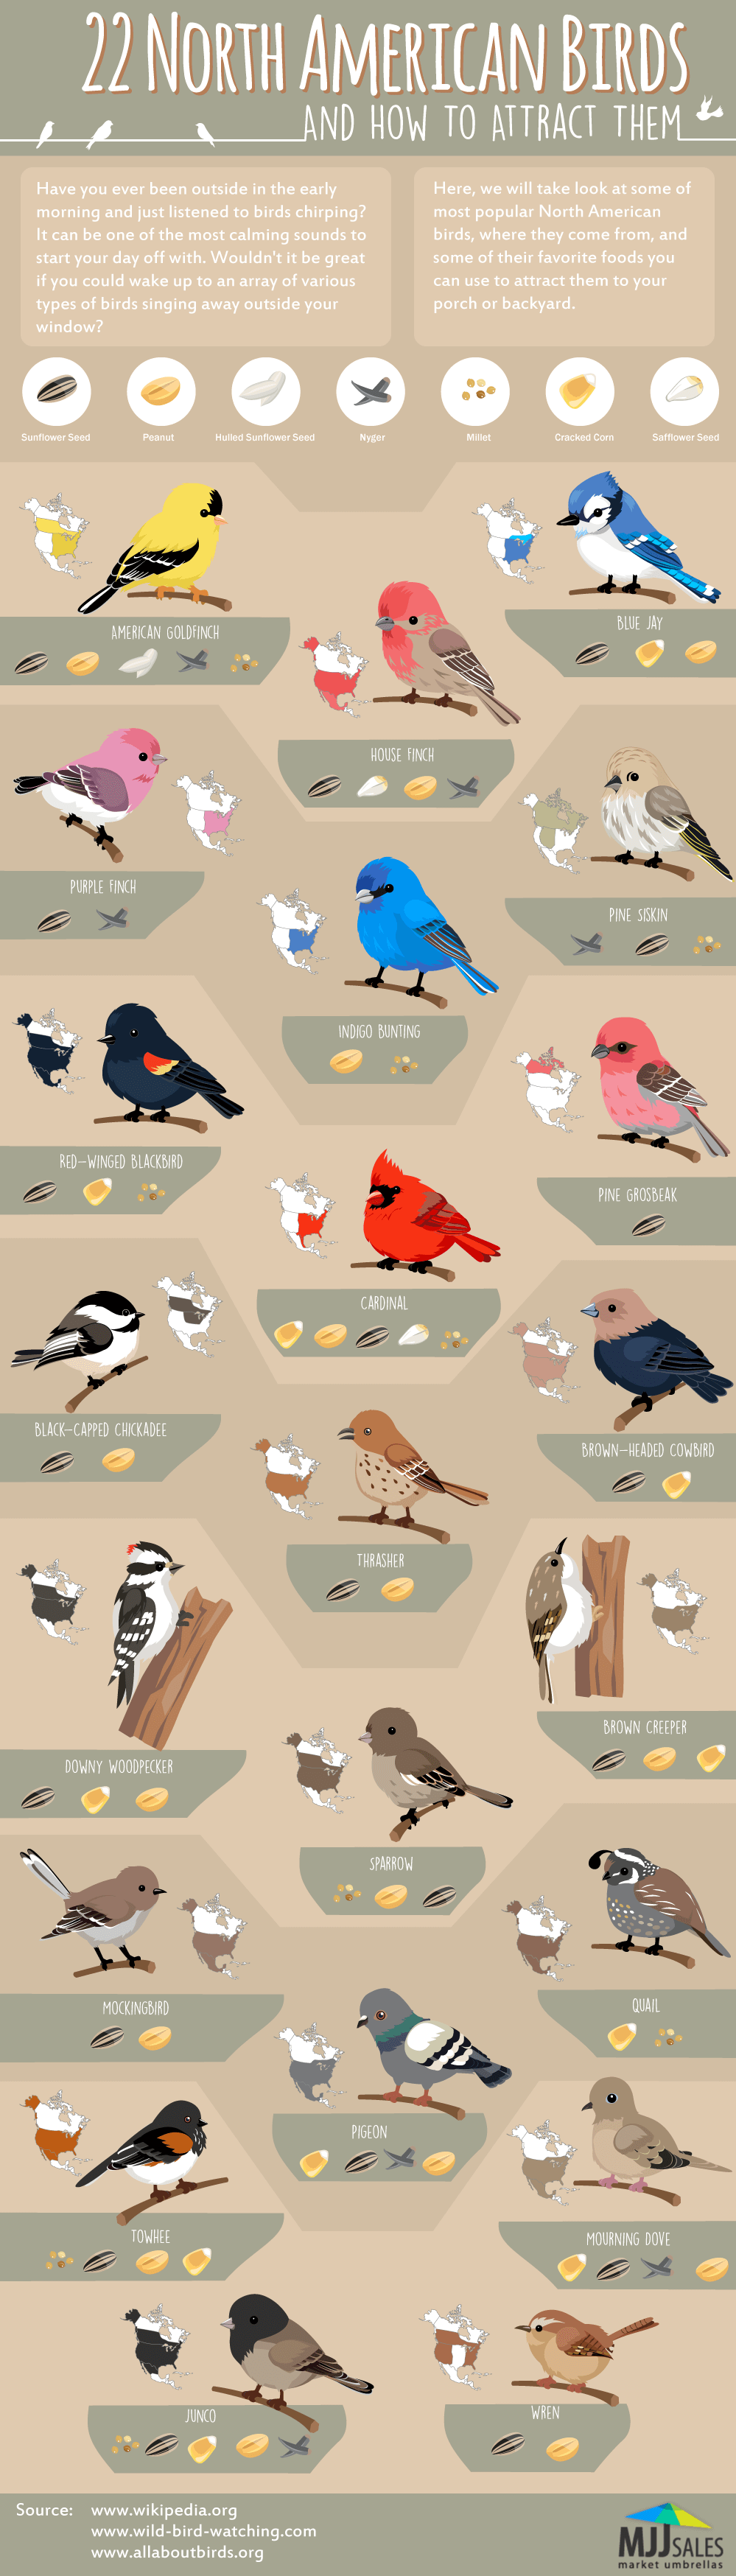 22 North American Birds and How to Attract Them